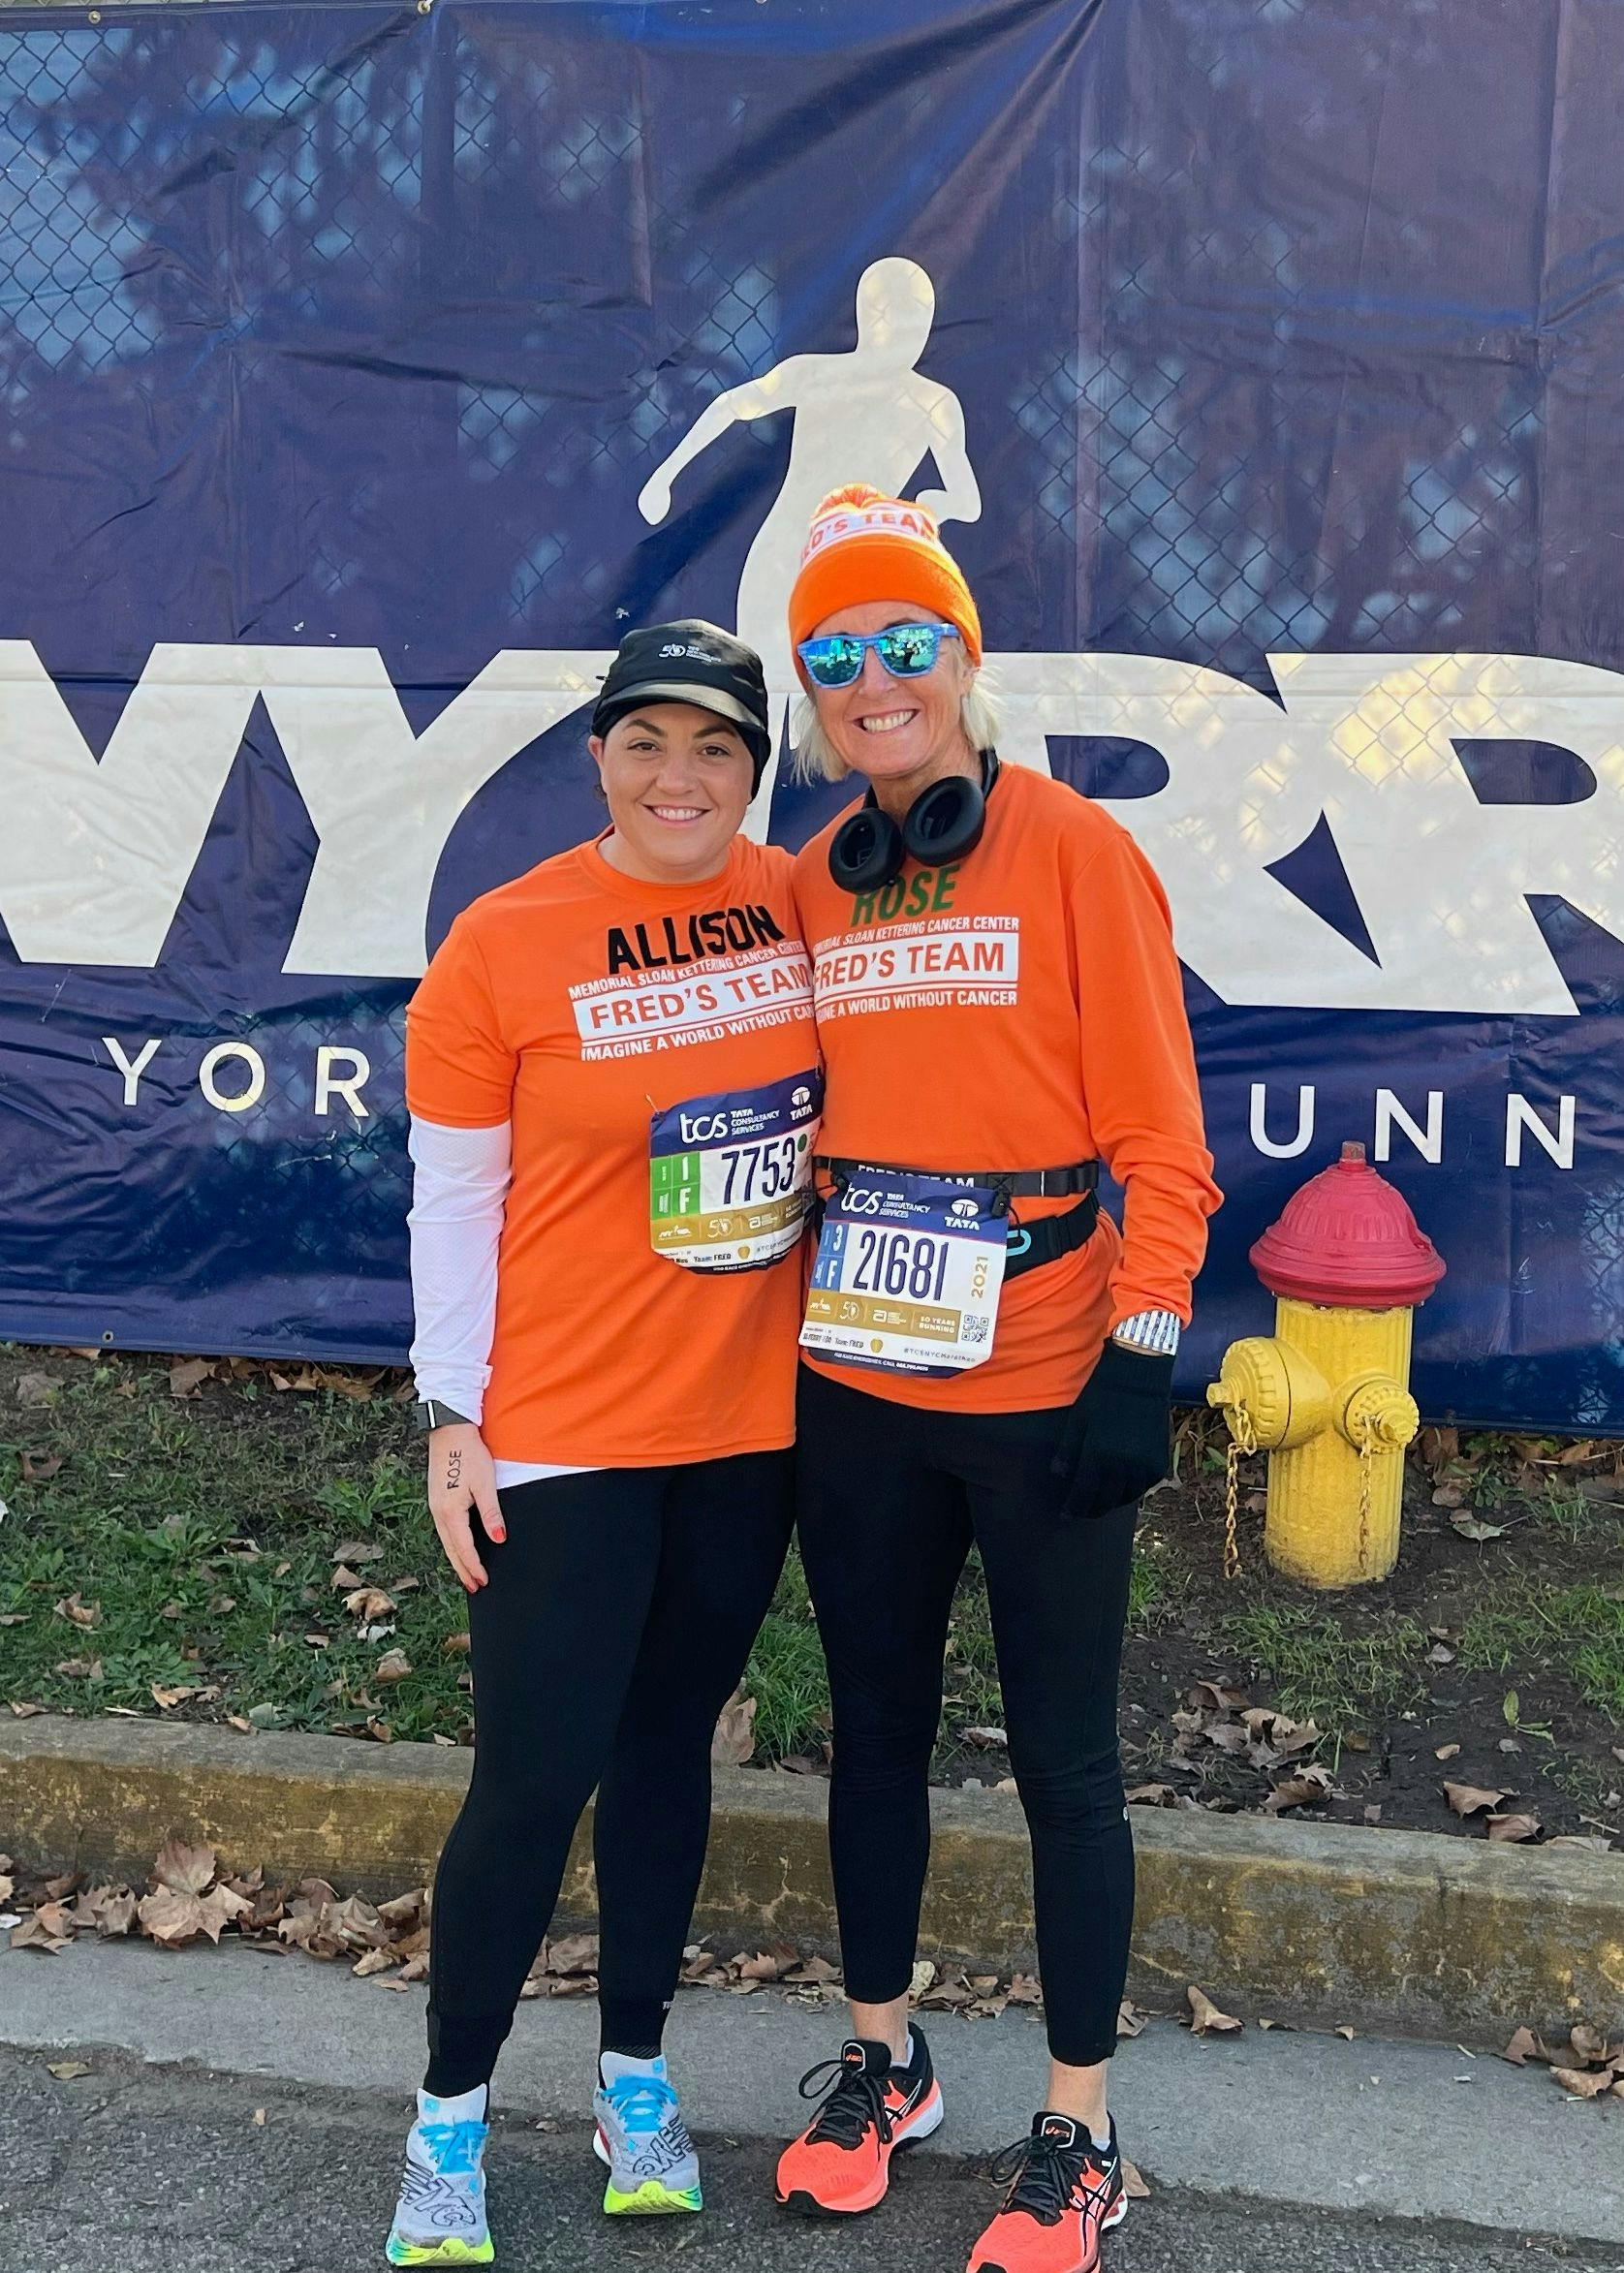 Dr. Allison Betof Warner and Rose Maxfield wearing orange shirts and running gear, smiling for a photo at the 2021 NYC Marathon